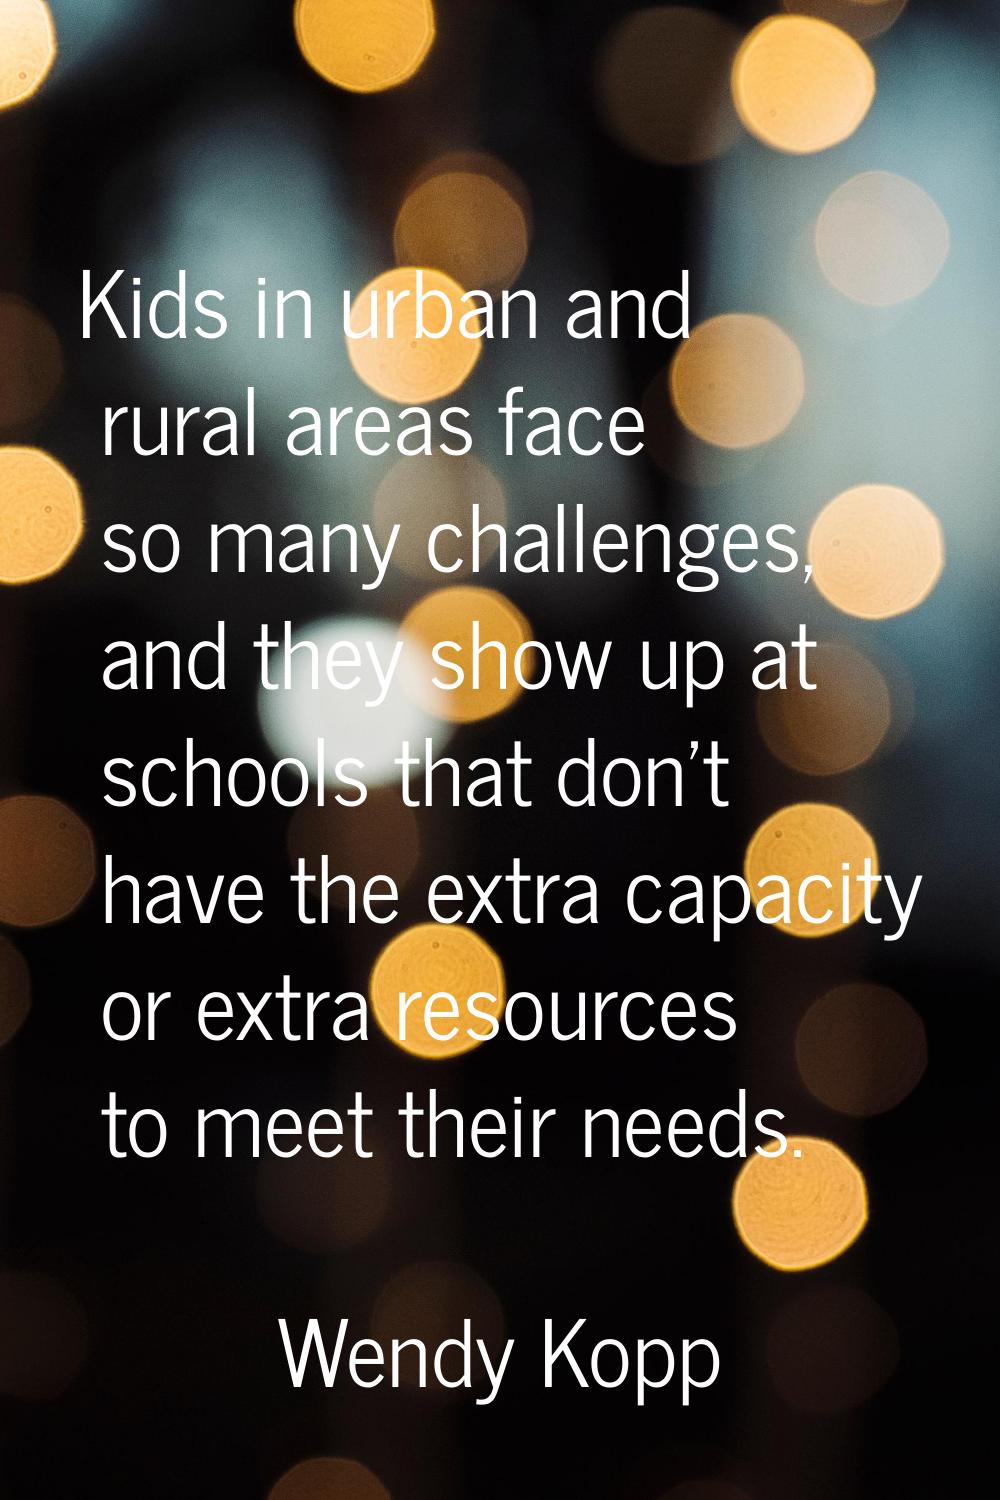 Kids in urban and rural areas face so many challenges, and they show up at schools that don't have 